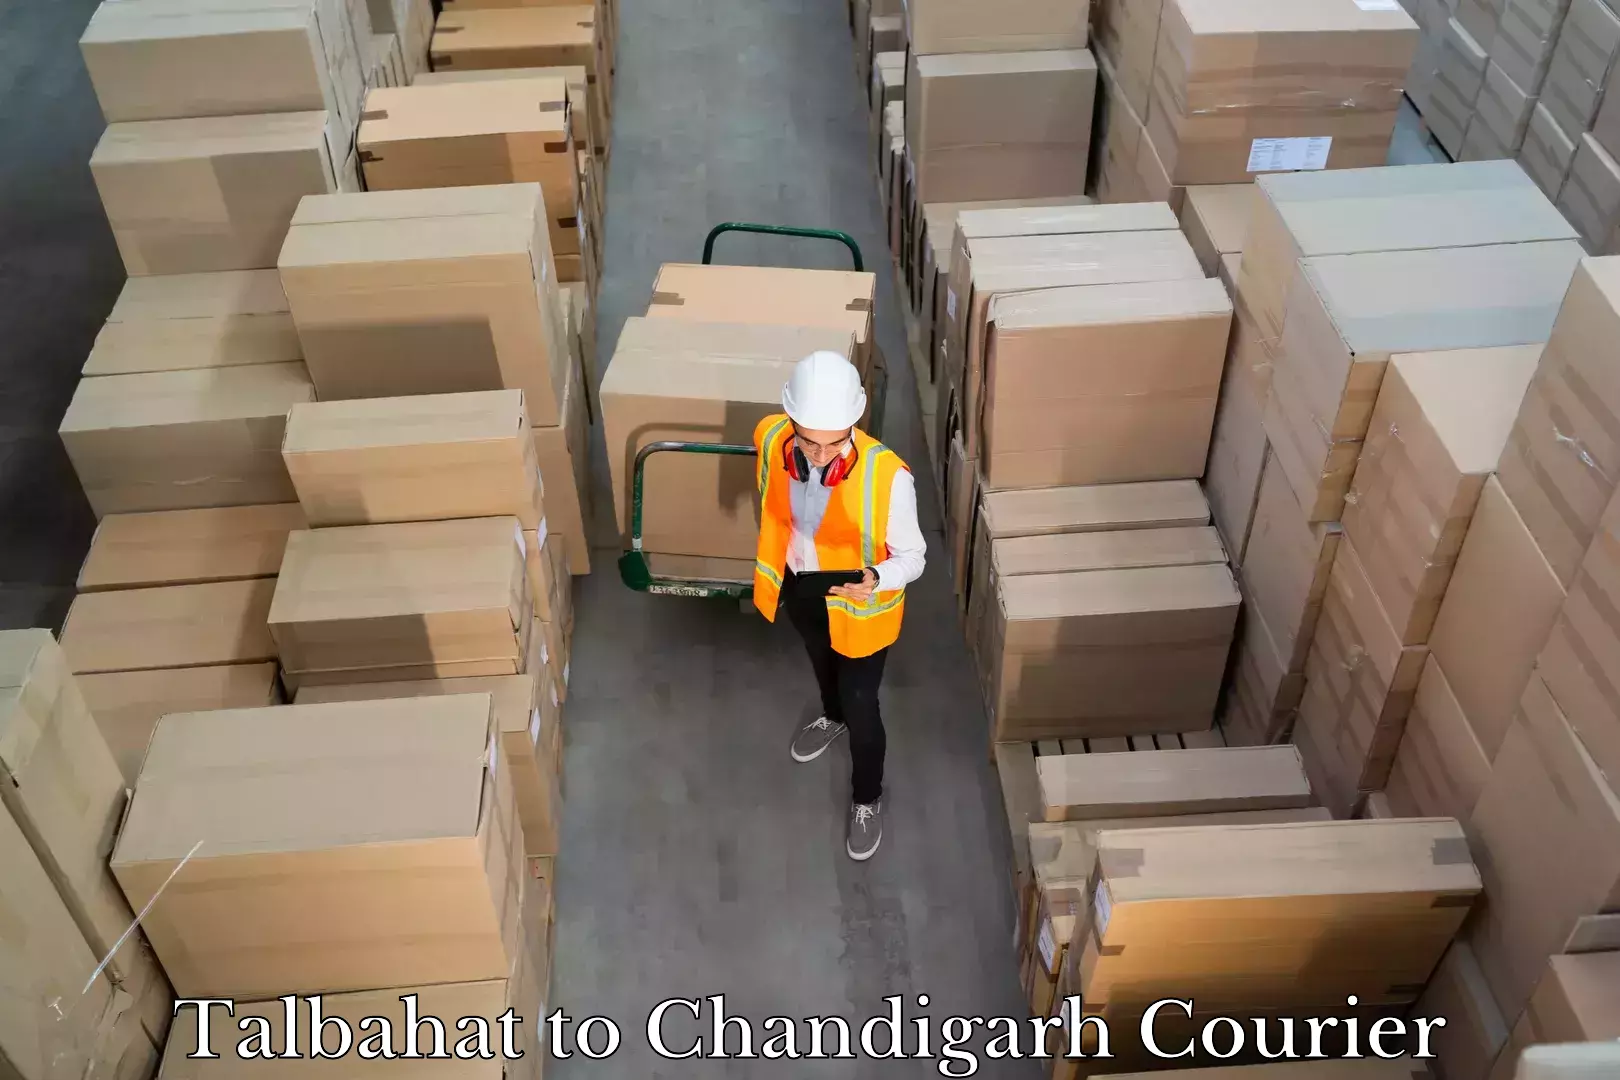 Baggage transport professionals Talbahat to Chandigarh